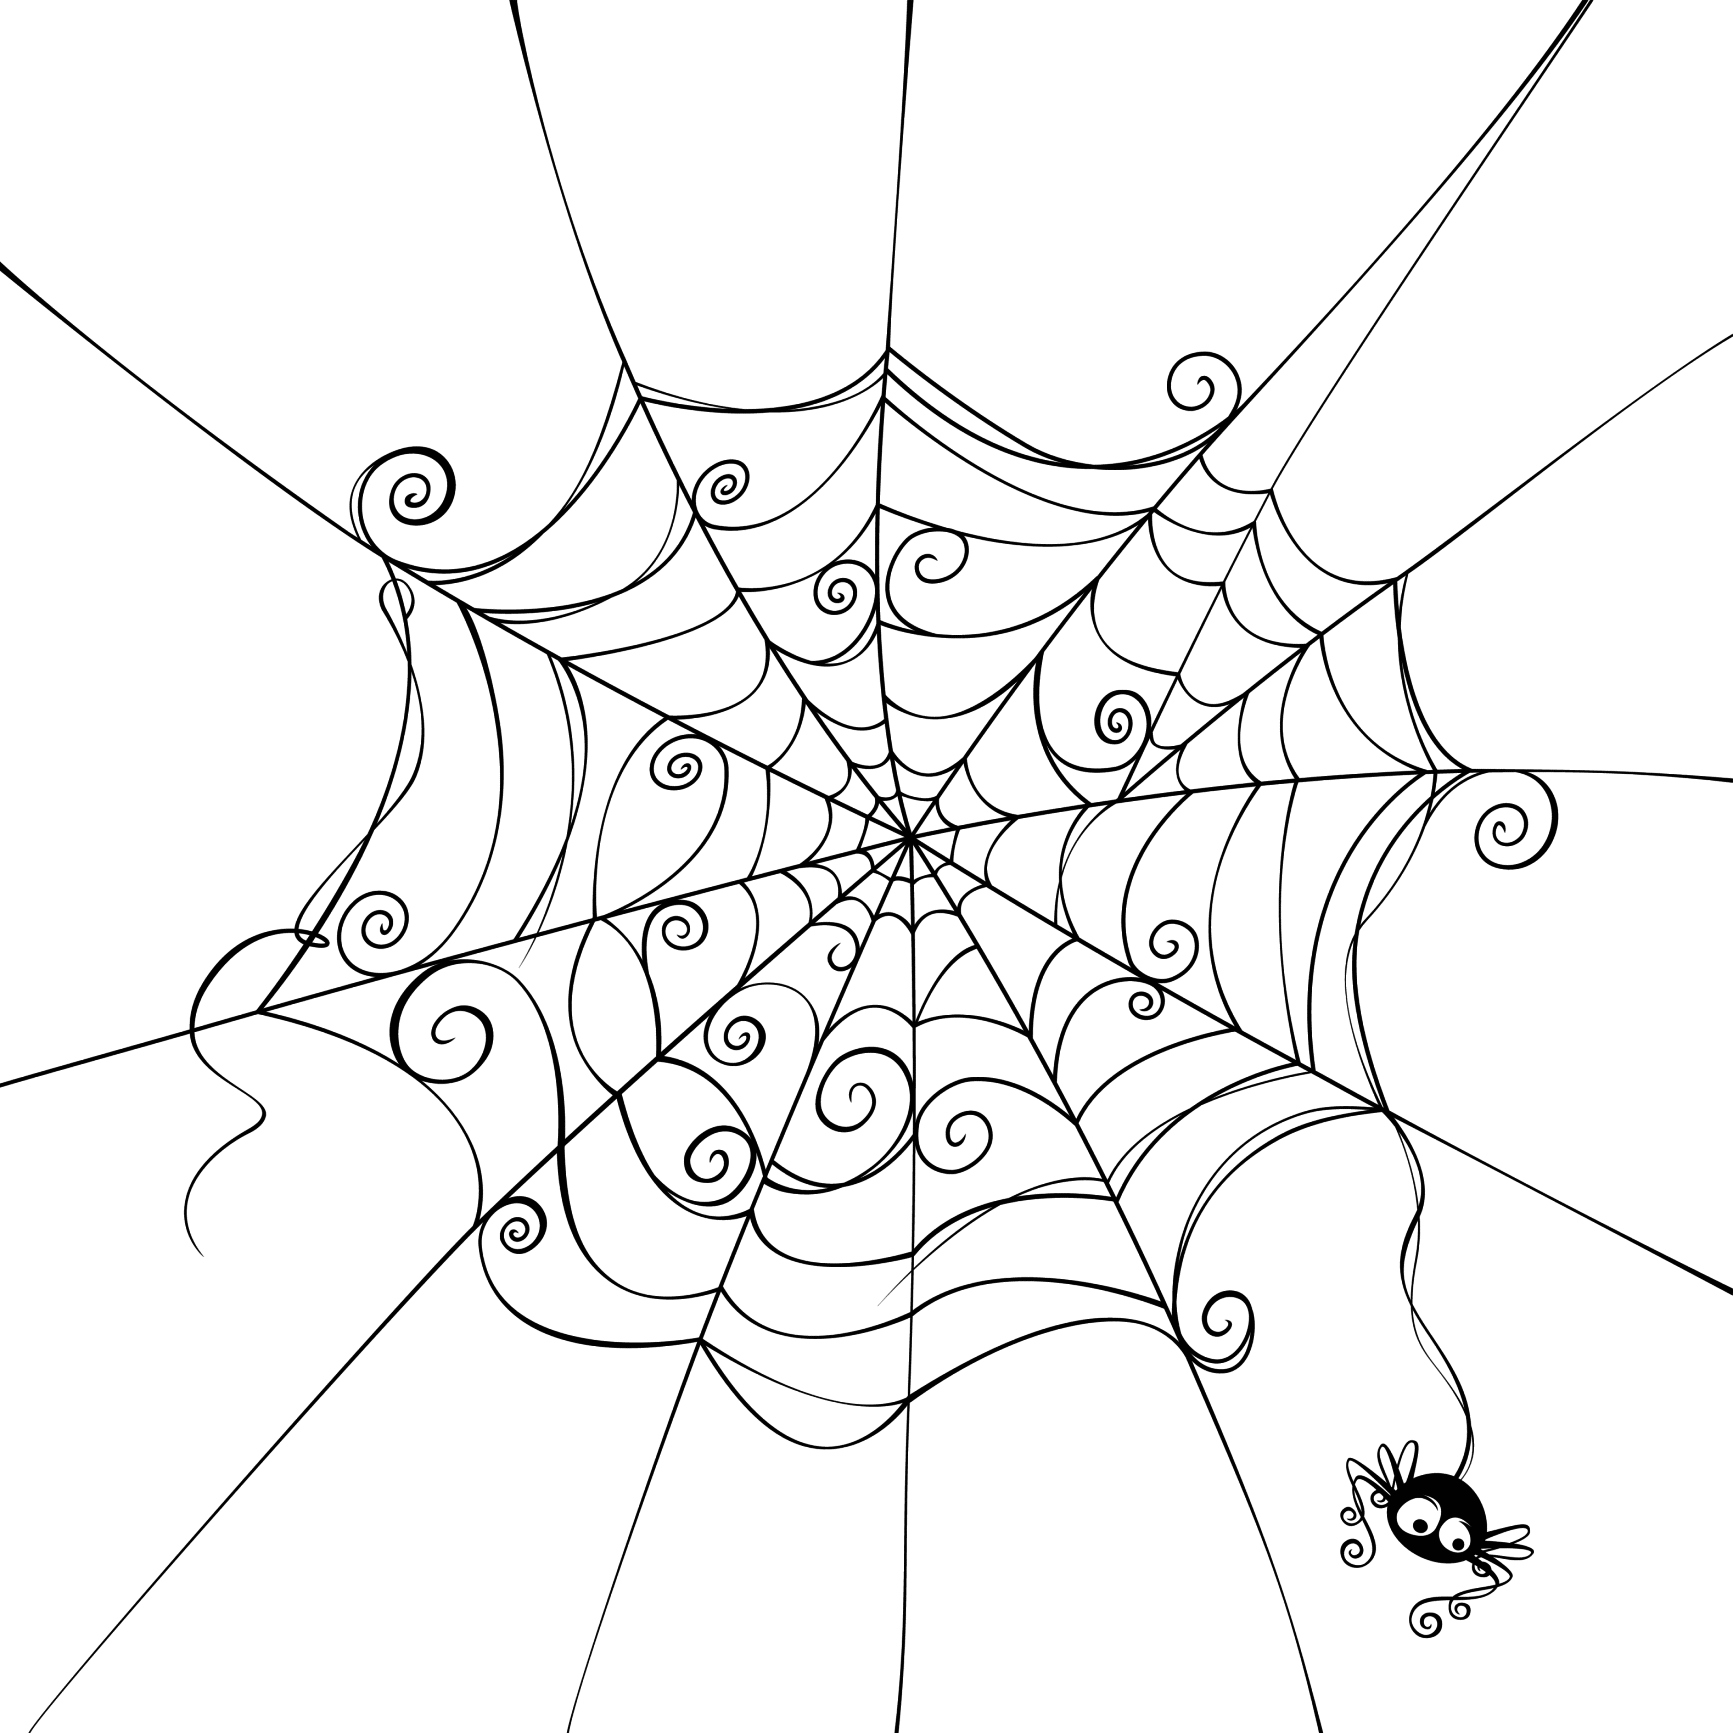 Halloween spider drawing 